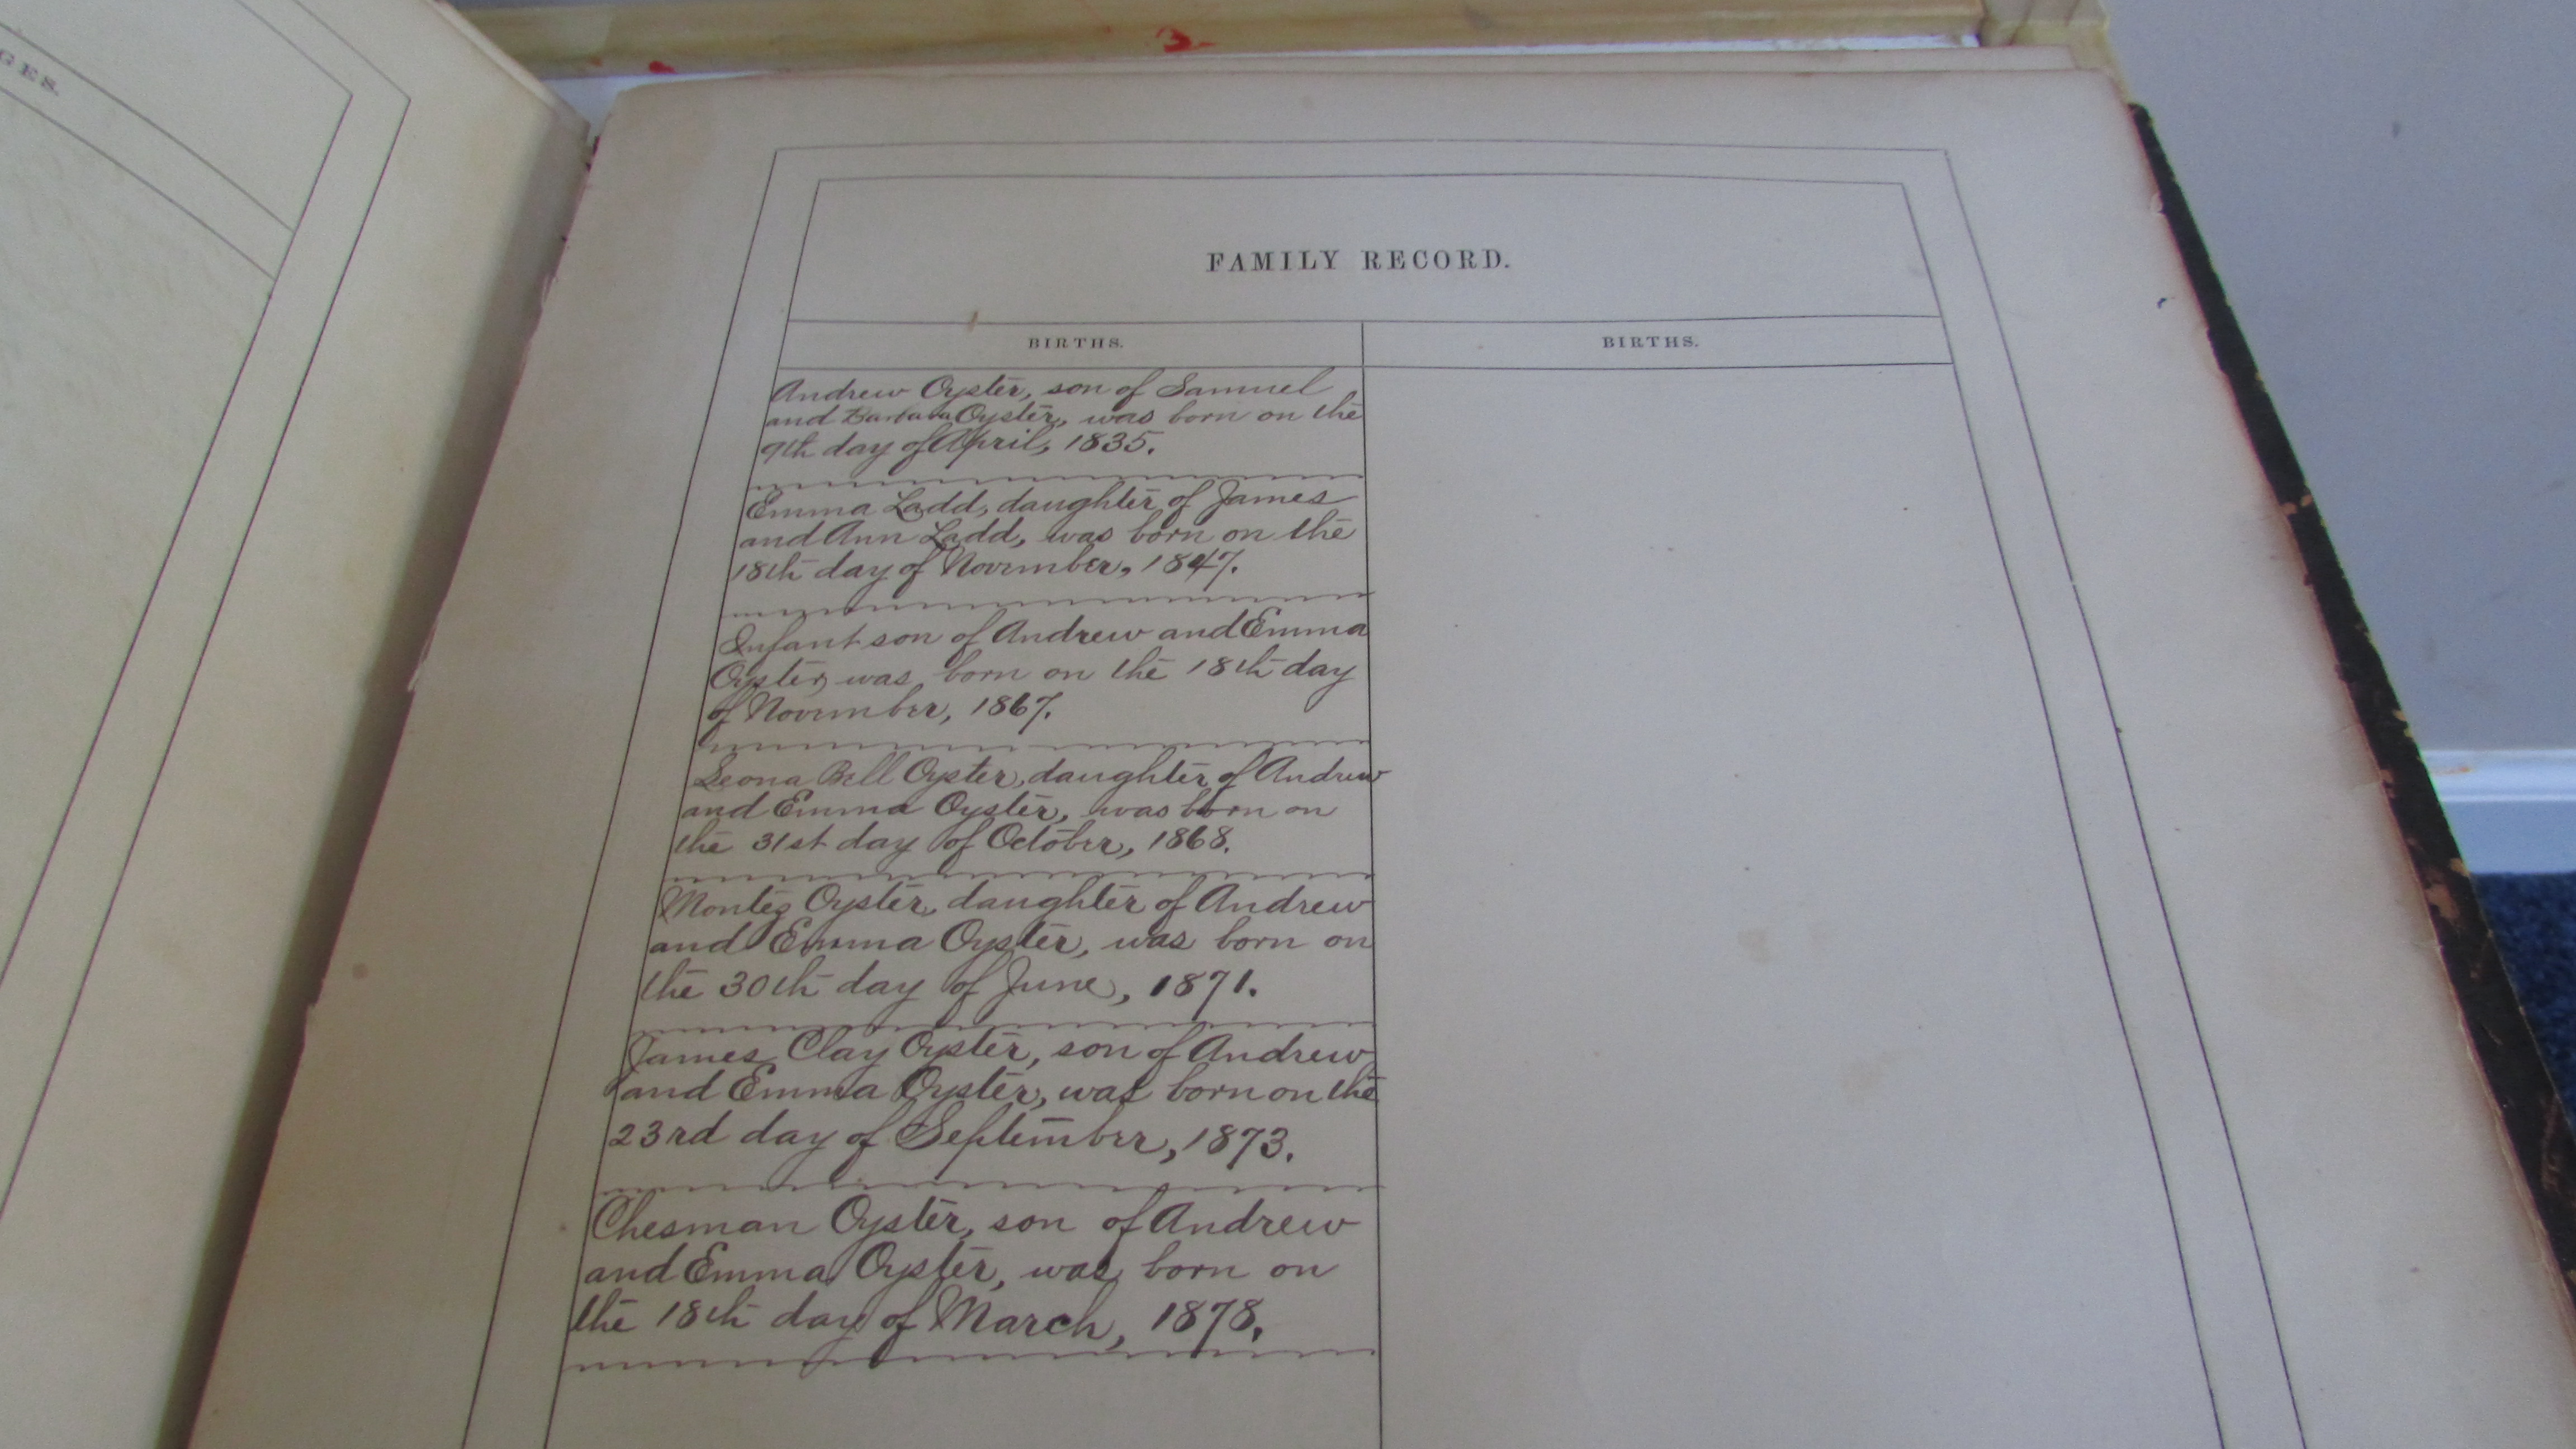 Second inscribed Family Record page